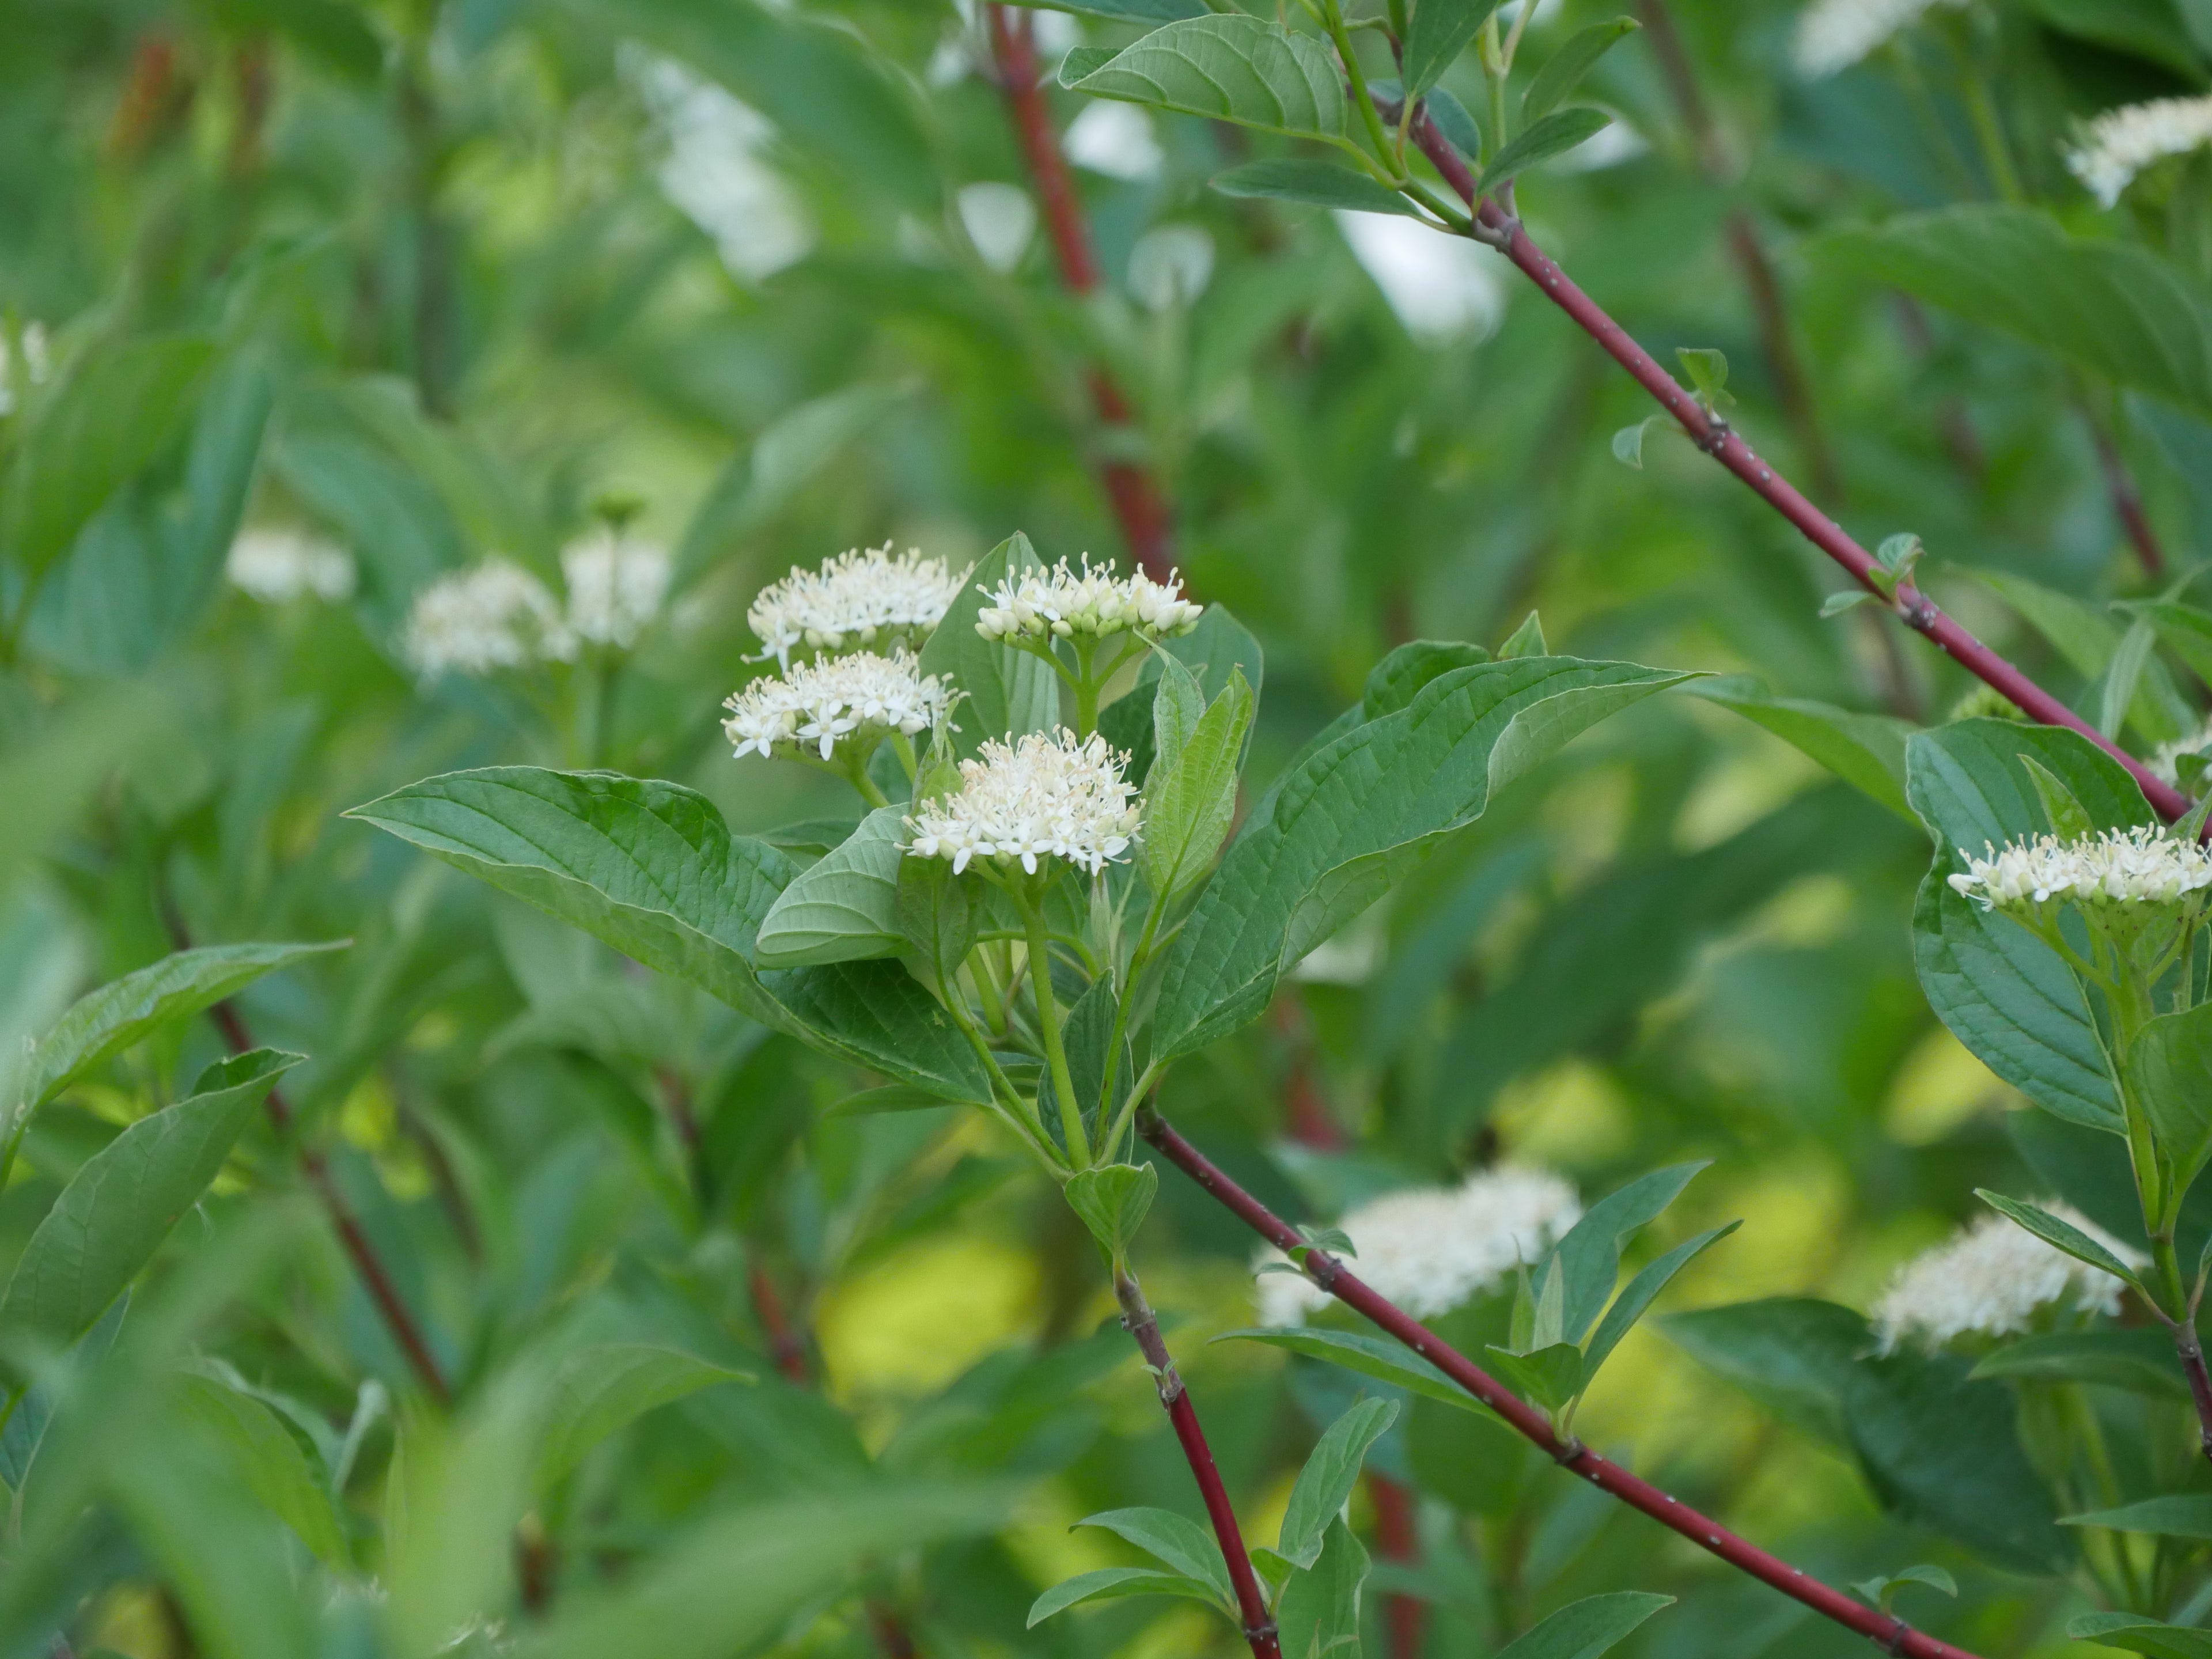 The white flower clusters of Arctic Fire red twig dogwood